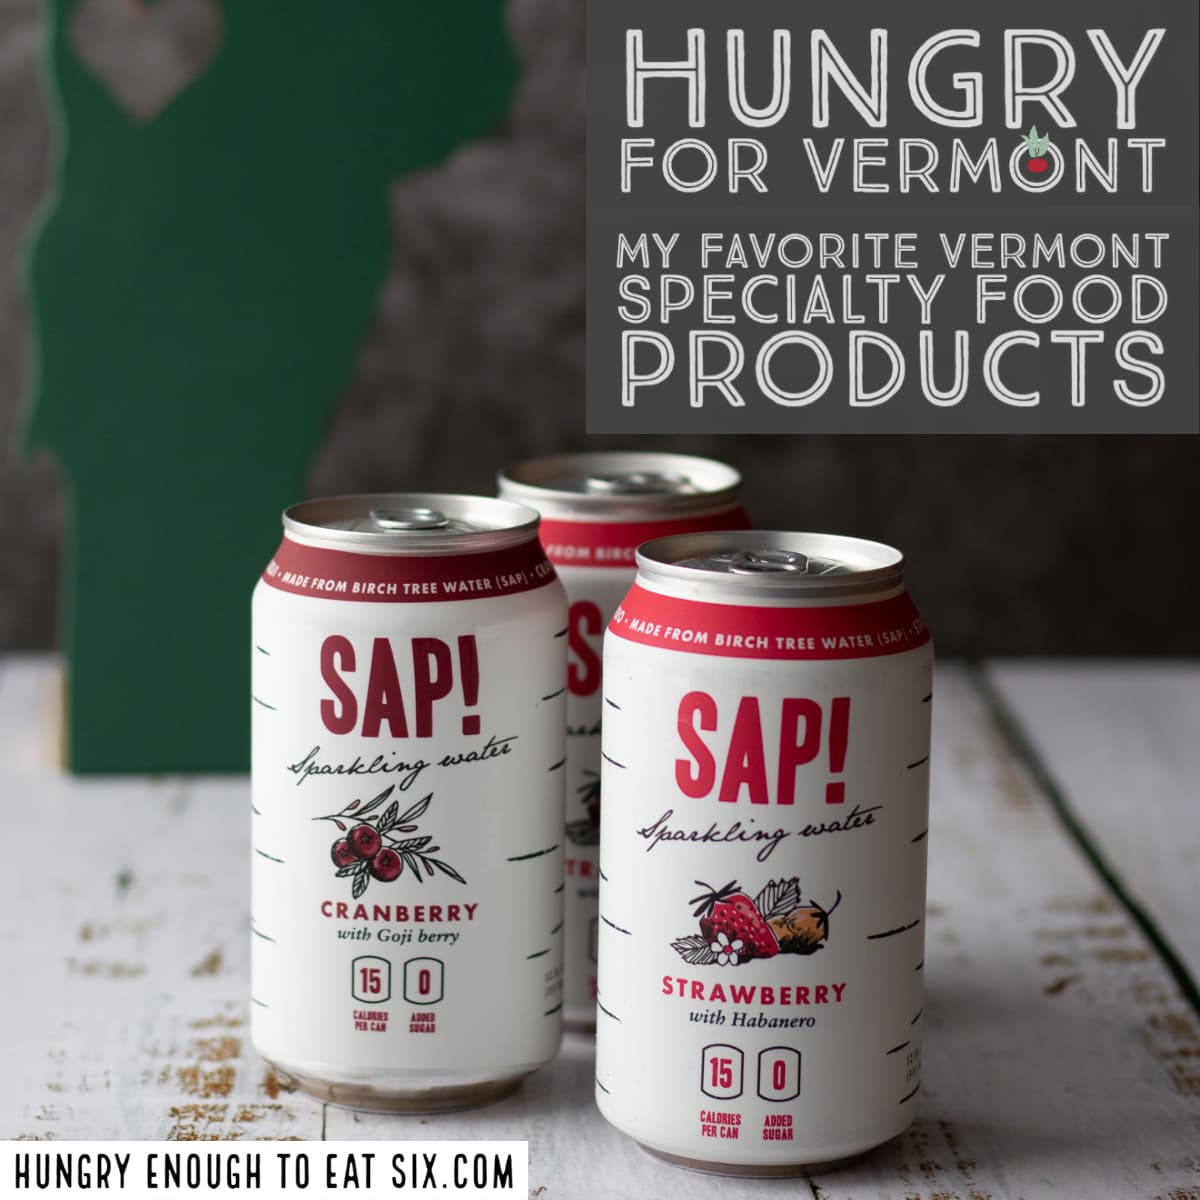 Three cans of Sap! sparkling water on a white wooden surface